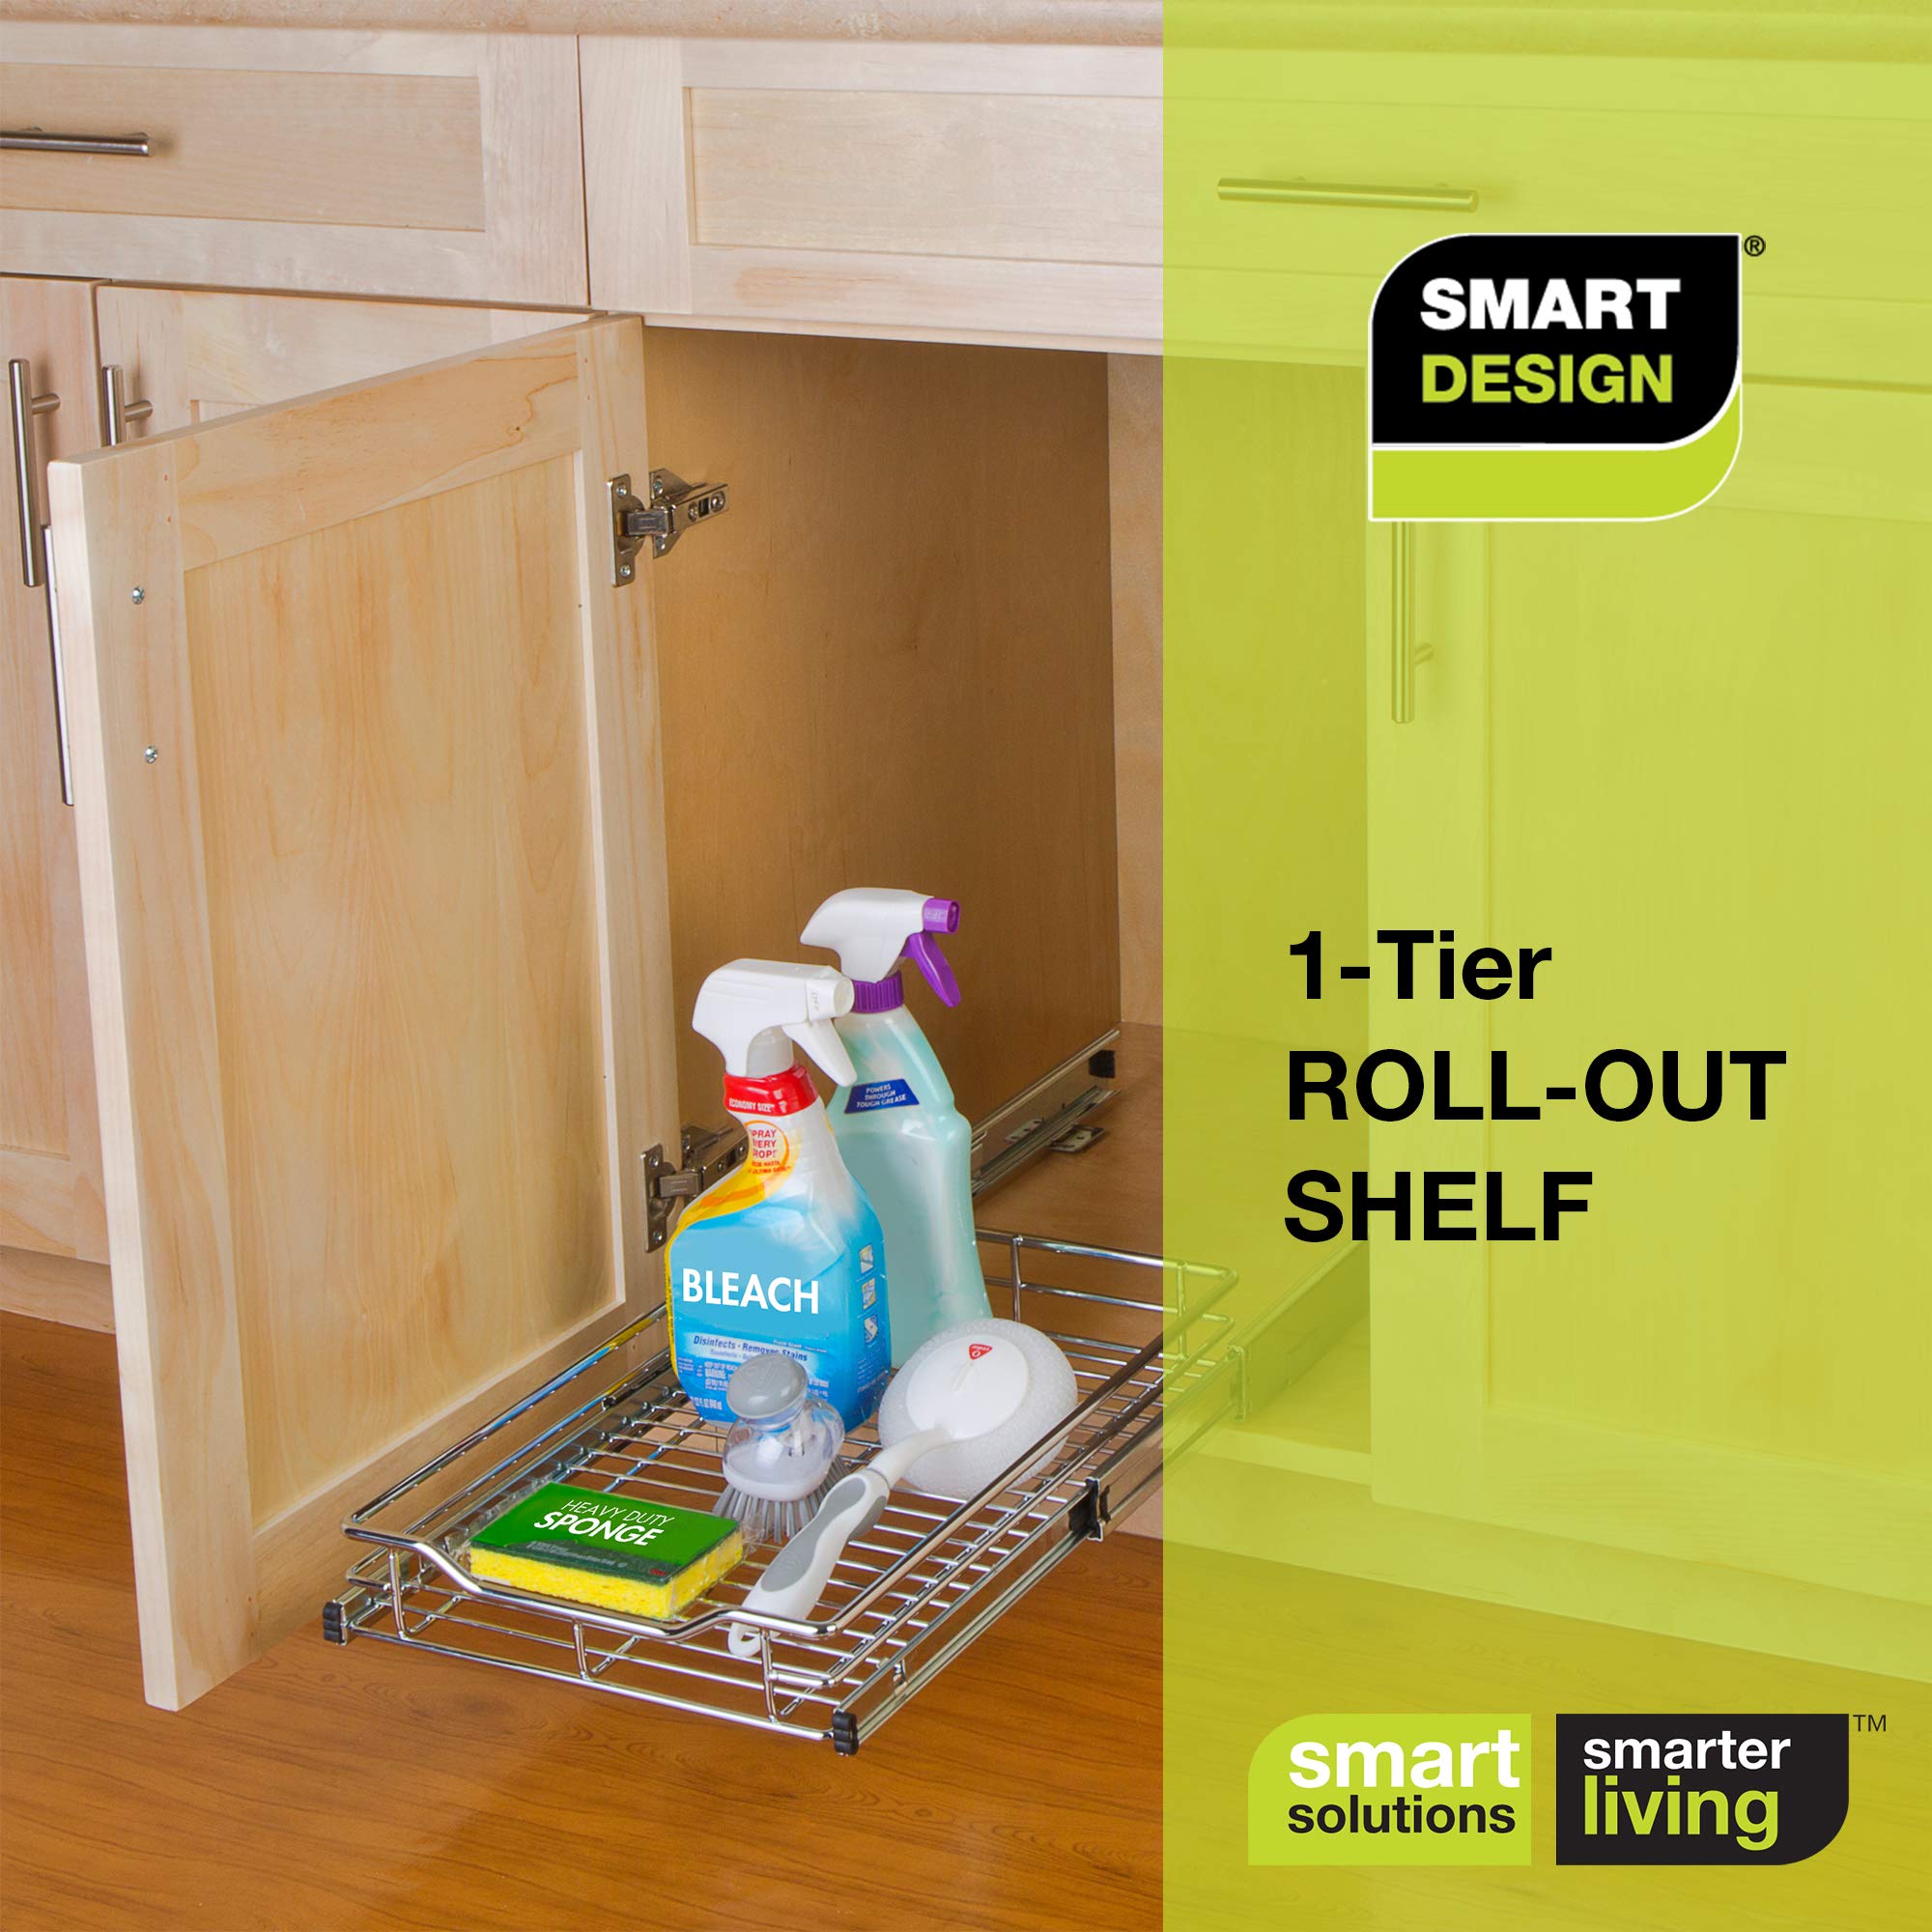 Smart Design Pull Out Cabinet Shelf Organizer - Extra Large Tall - Smooth  Roll-Out Extendable Sliding Drawer - Steel Metal - Holds 100 lbs. - Kitchen